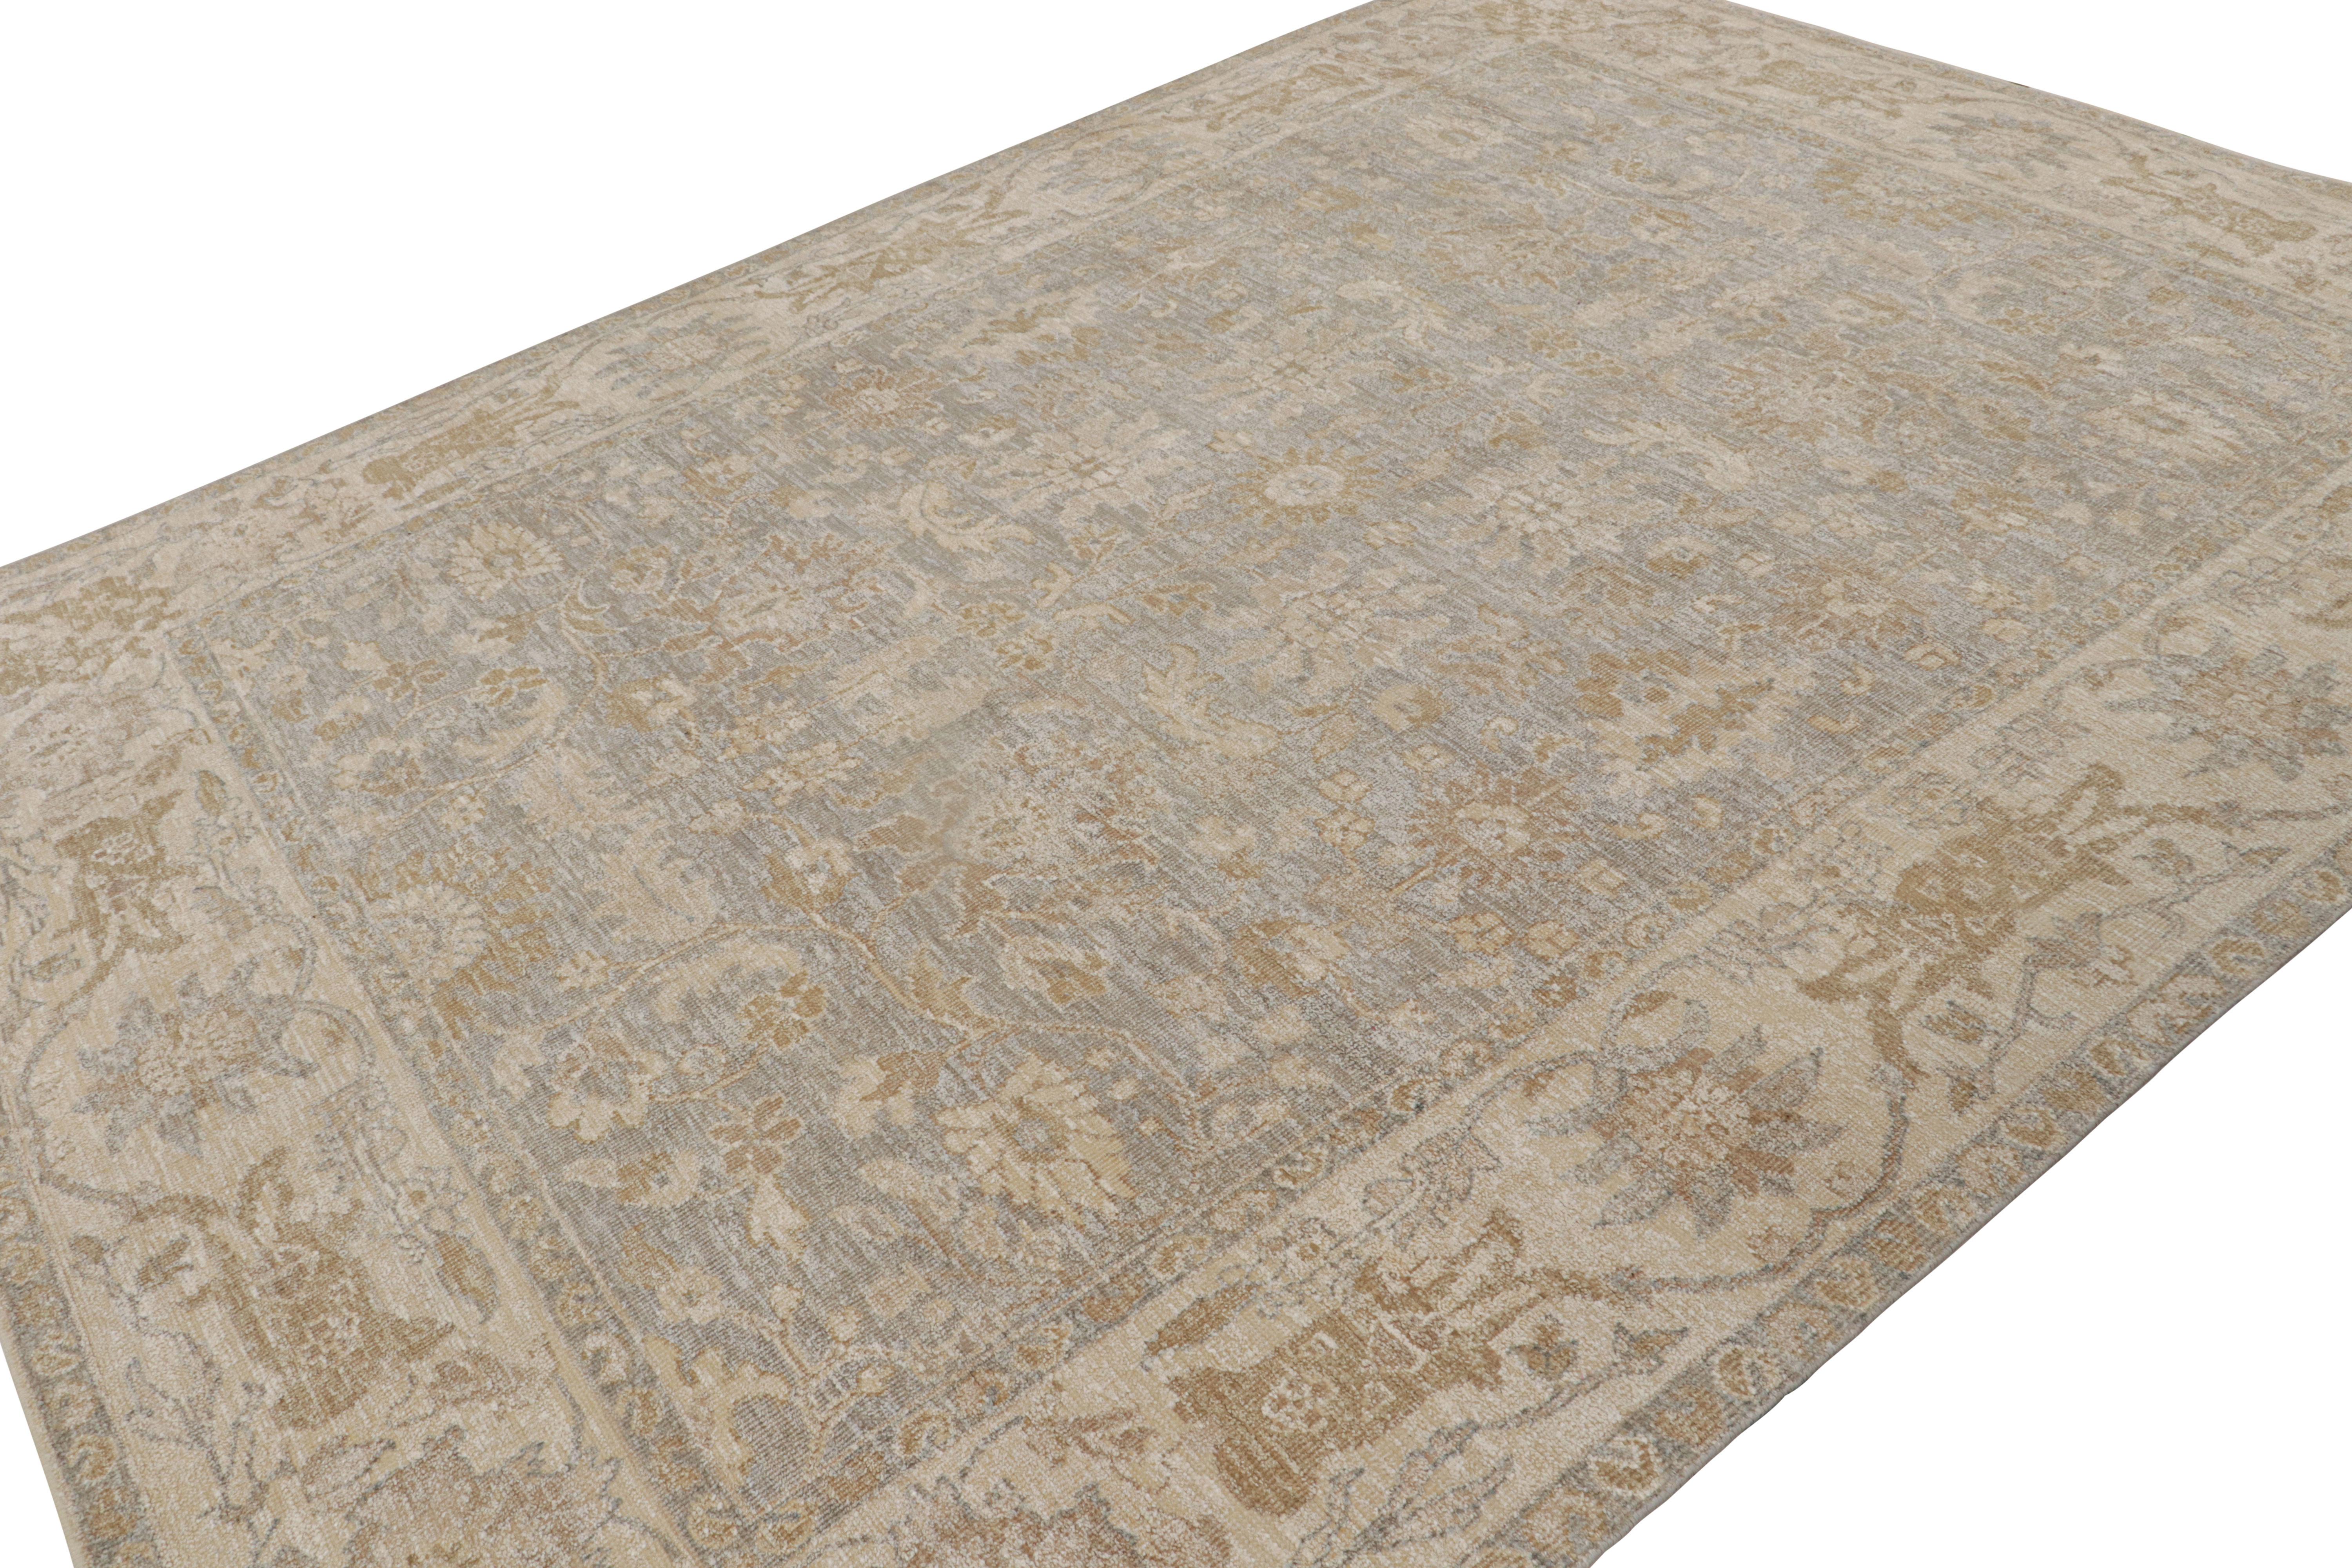 This 9x12 rug from the Modern Classics Collection features beige/brown and silver/gray underscores, ivory floral patterns in a rich and elegant look.  

On the design: 

Connoisseurs will admire that this rug is made with a new yarn Josh Nazmiyal is